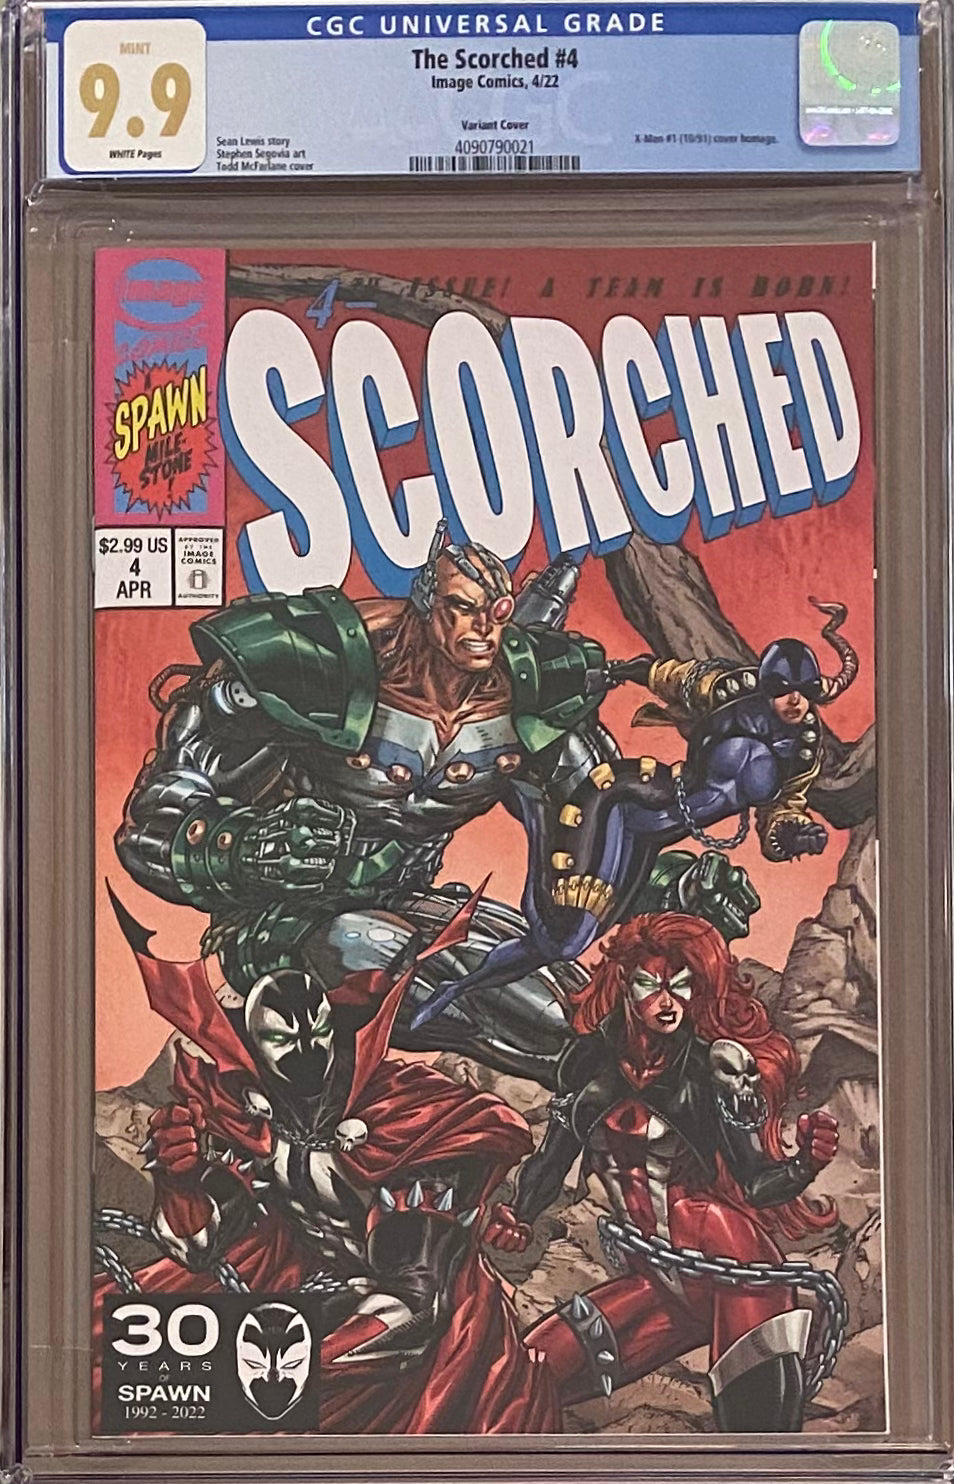 The Scorched #4 McFarlane Homage Connecting Variant CGC 9.9 MINT